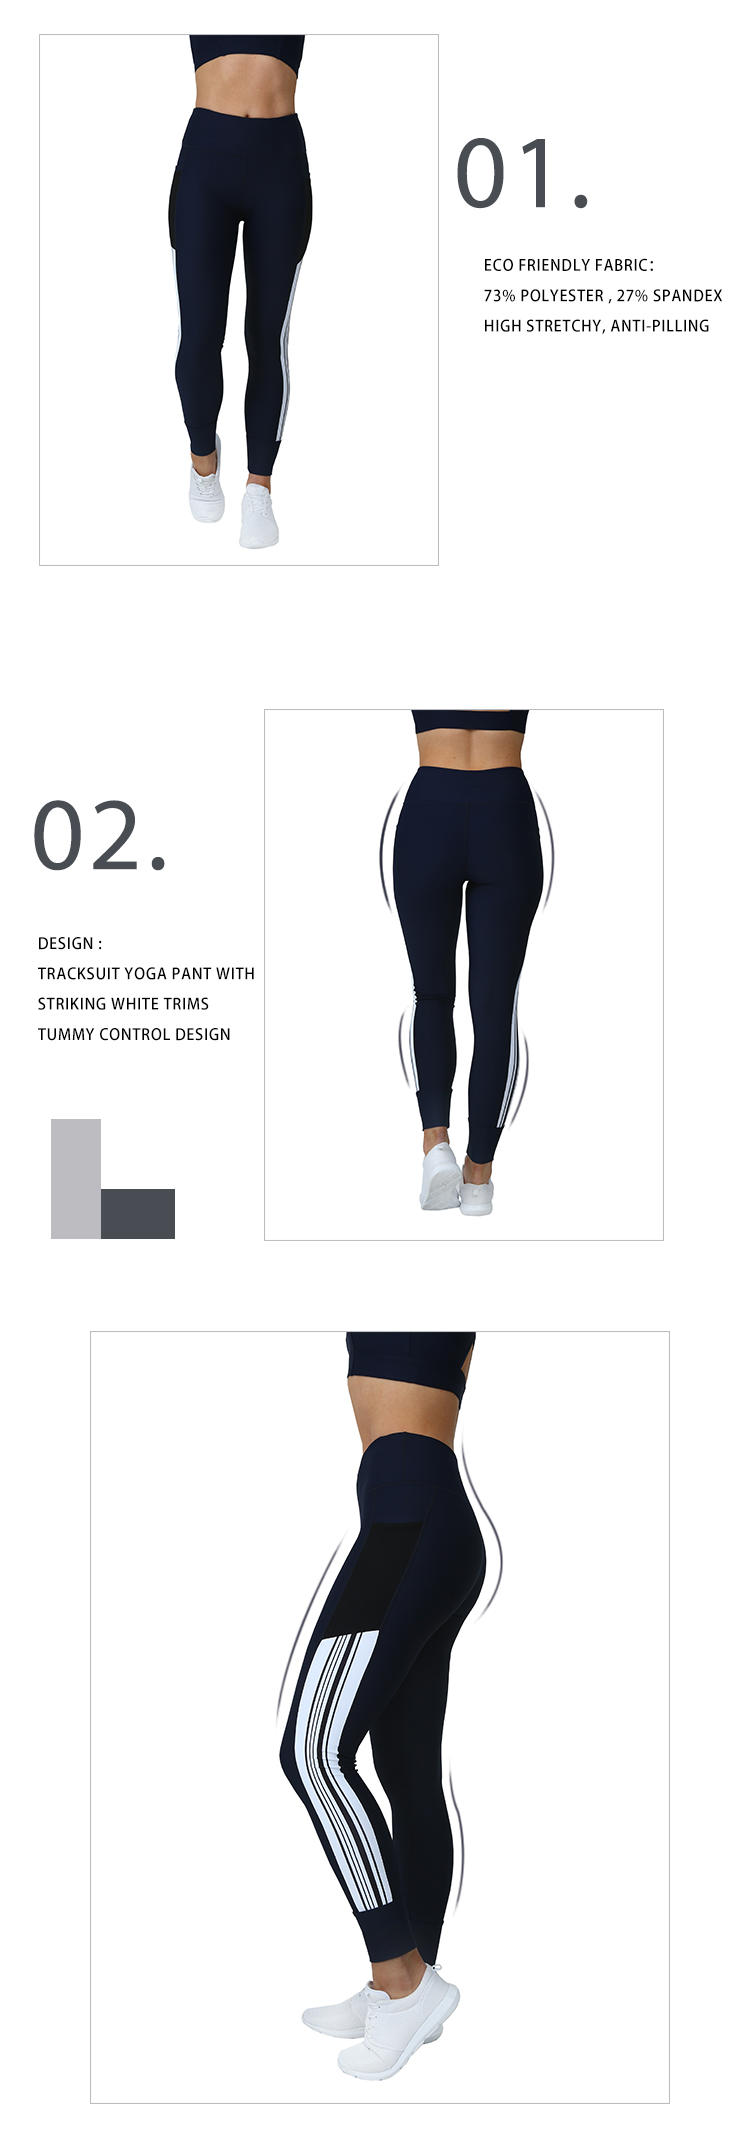 INGOR personalized yoga clothing companies factory price for women